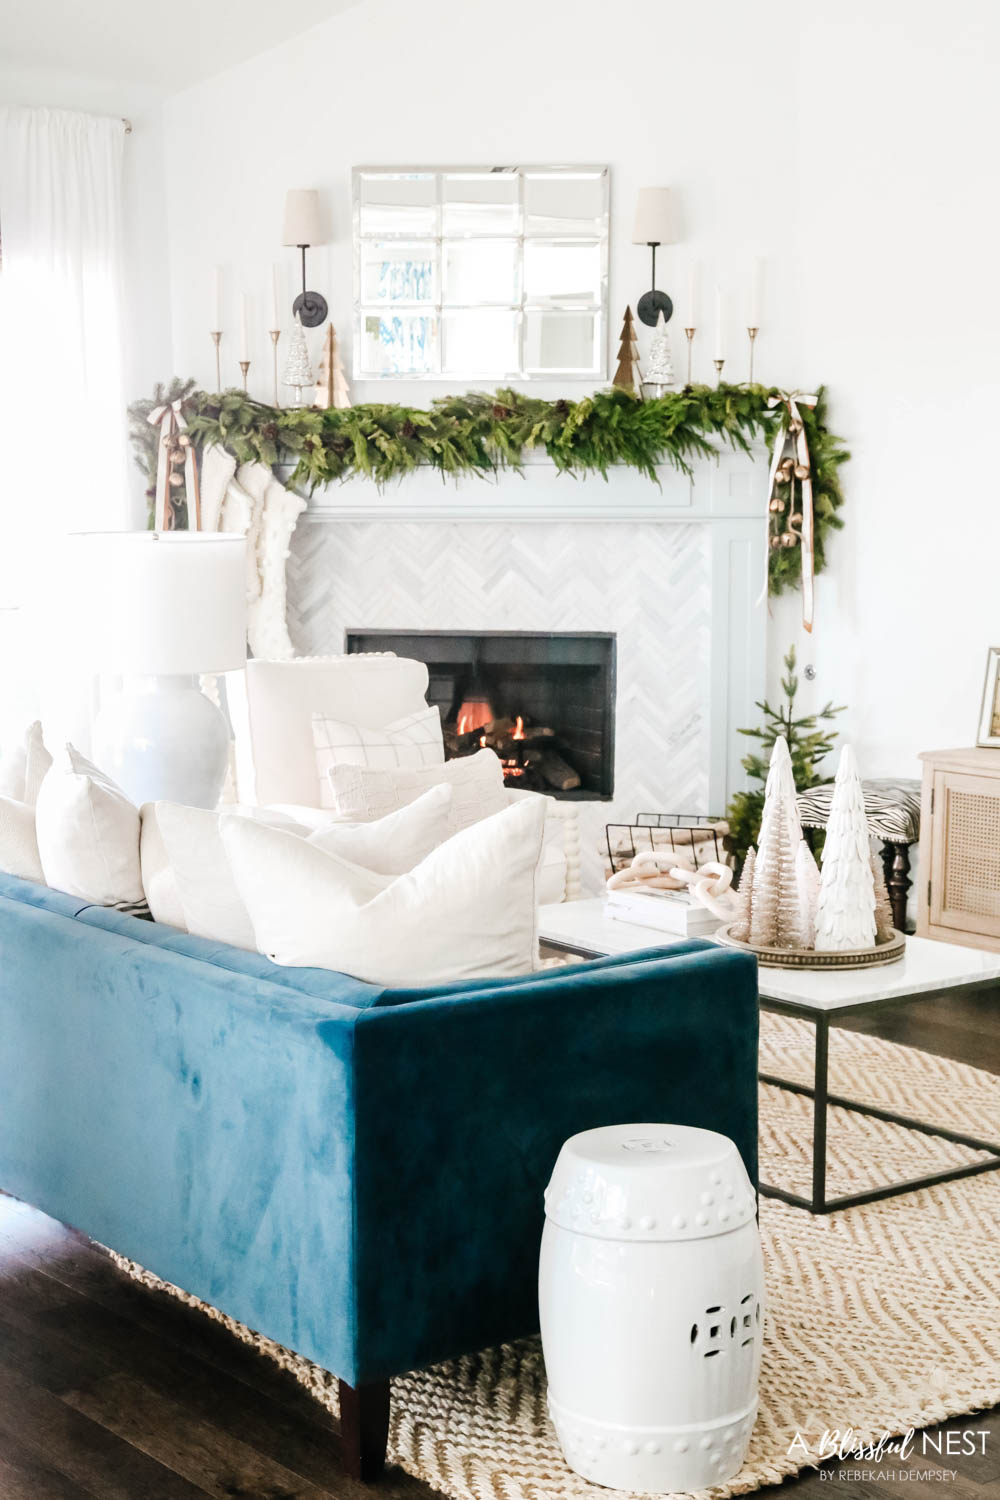 Navy blue velvet sofa facing a fireplace mantle. Green holiday garland with a mirror above